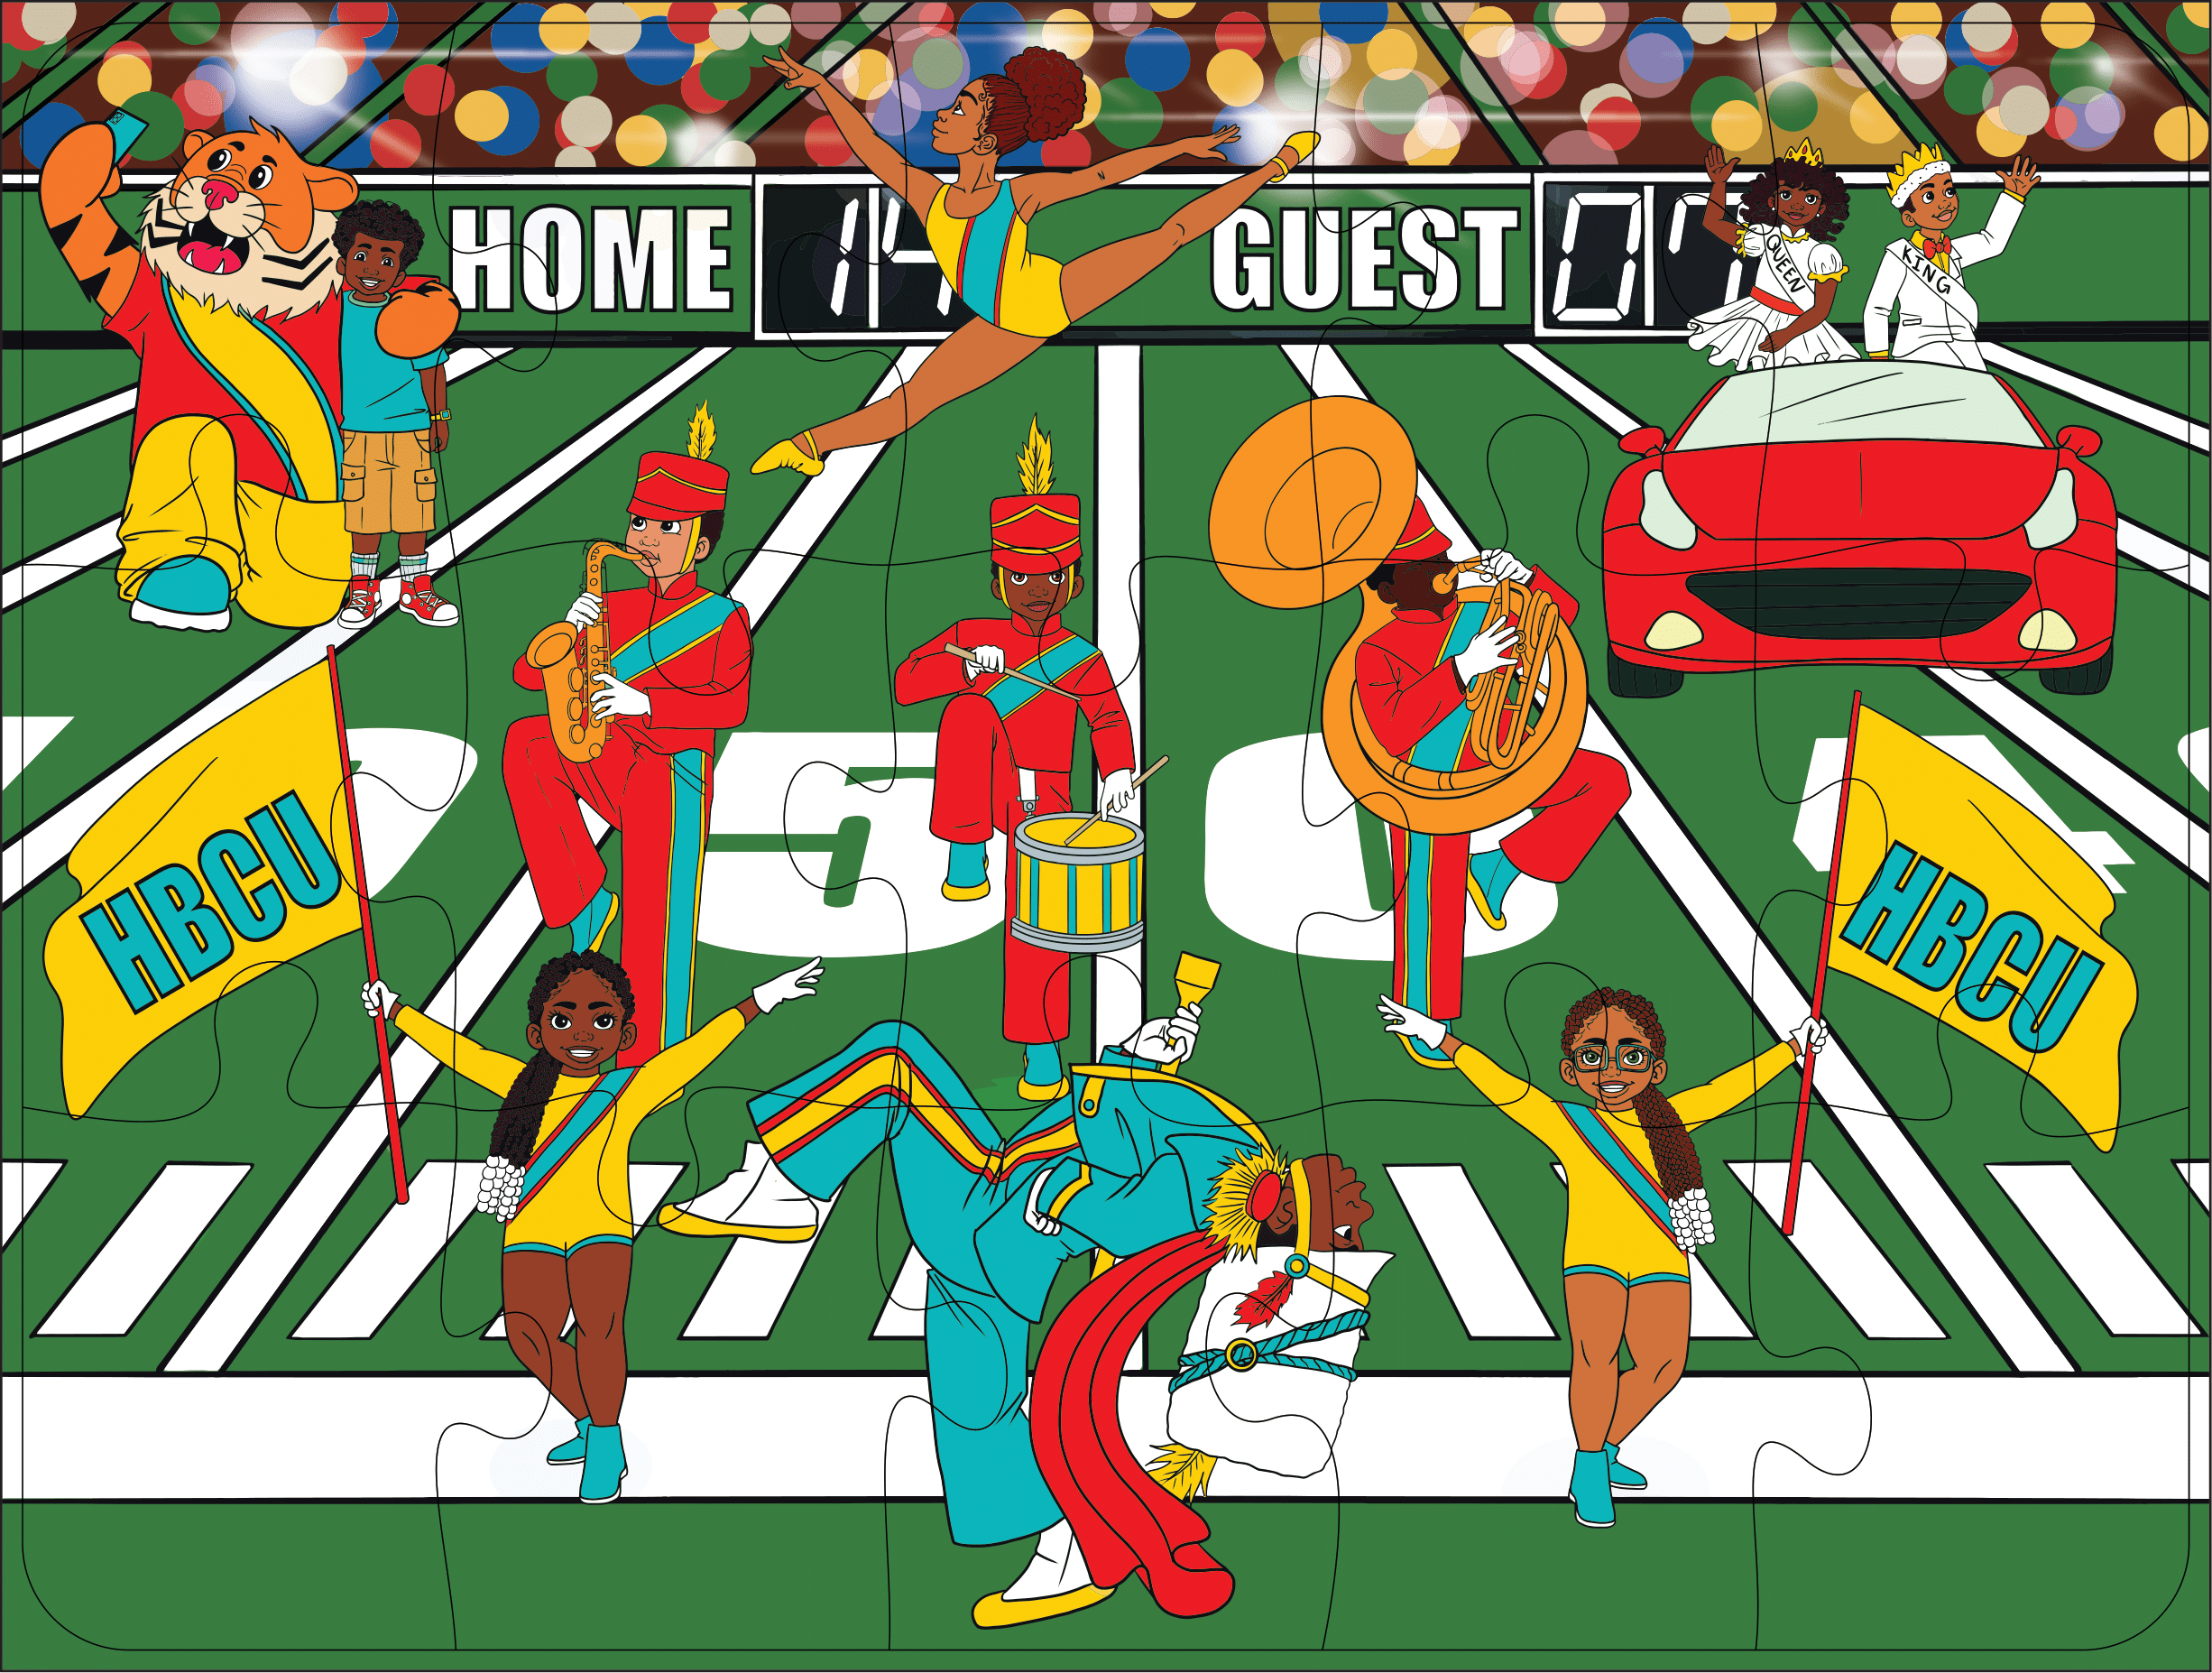 HBCU Homecoming Puzzle (15 pieces)